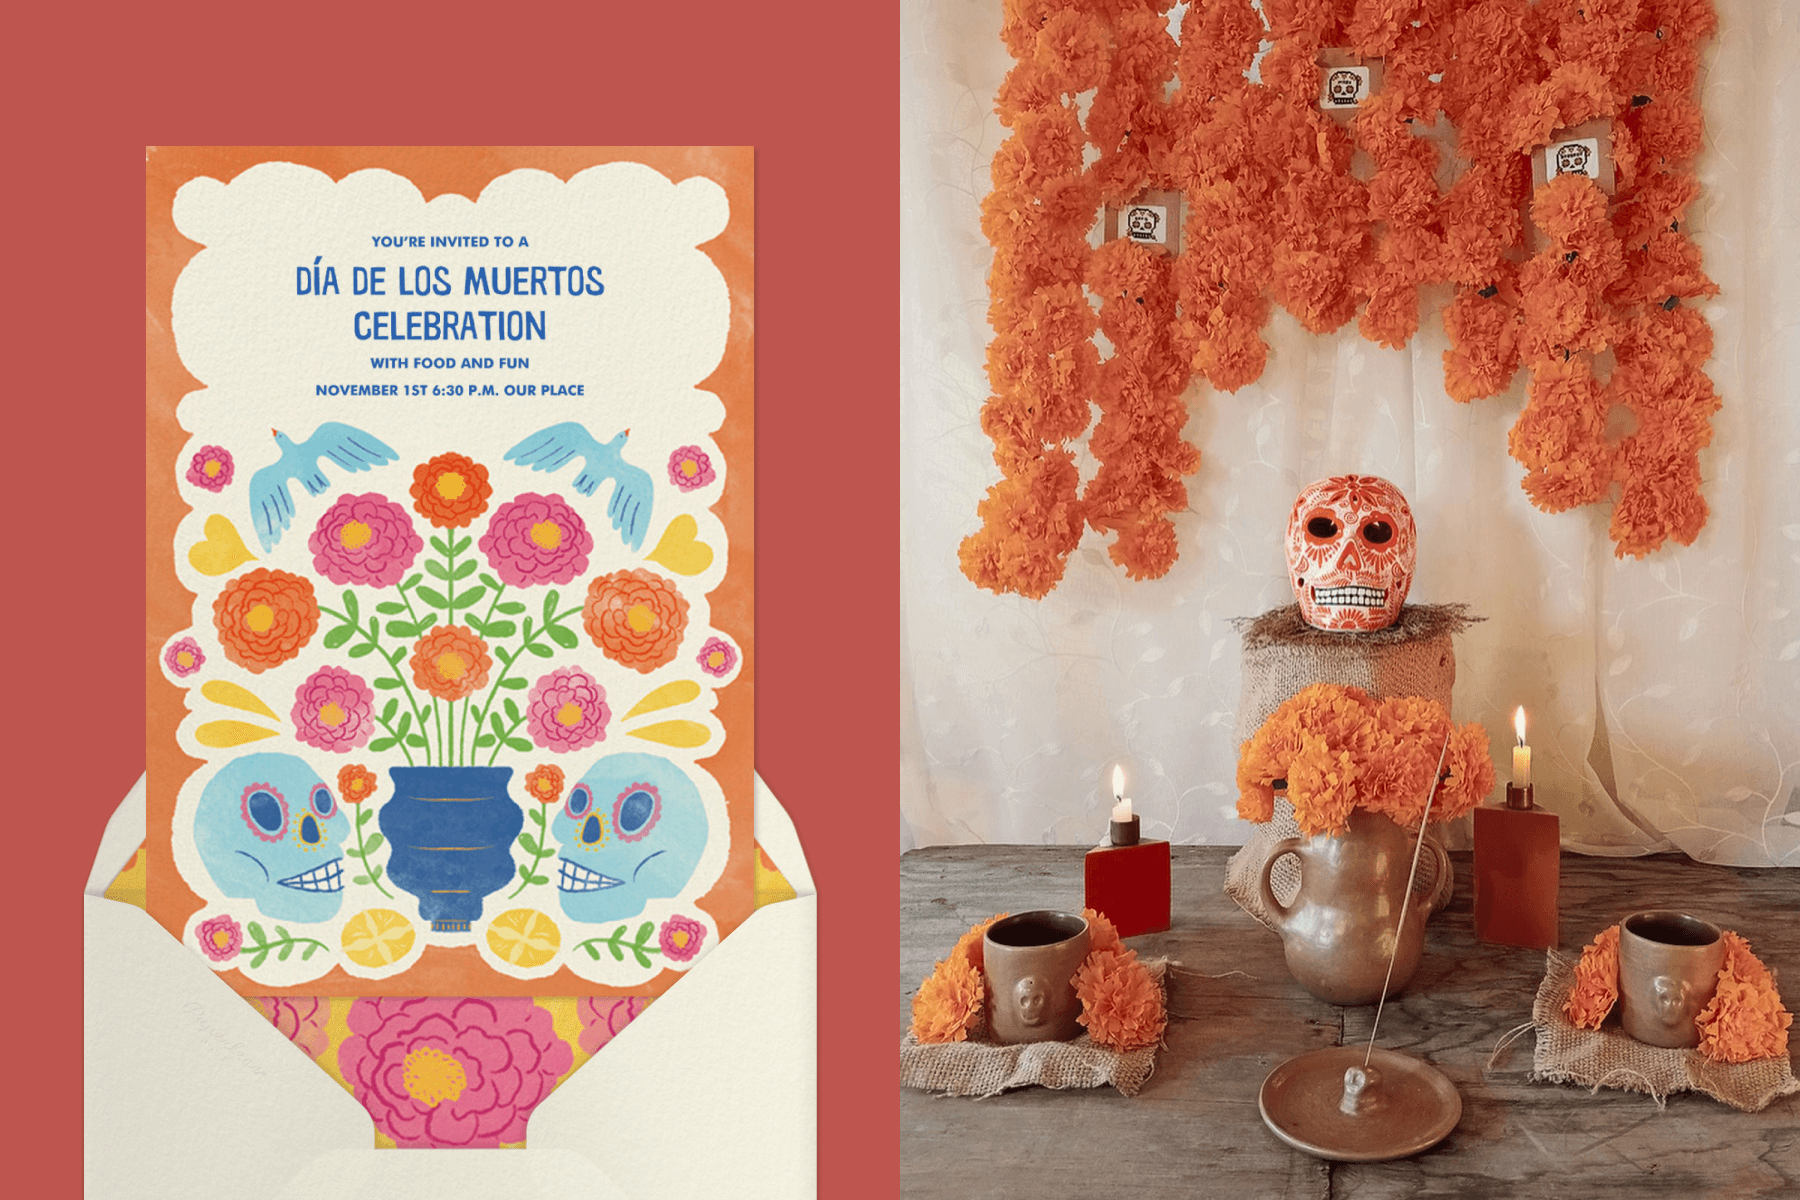 Left: A Dia de Muertos invitation with illustrations of marigolds, birds, and skulls; Right: A minimalist ofrenda with a skull on a stool, incense, and marigolds.